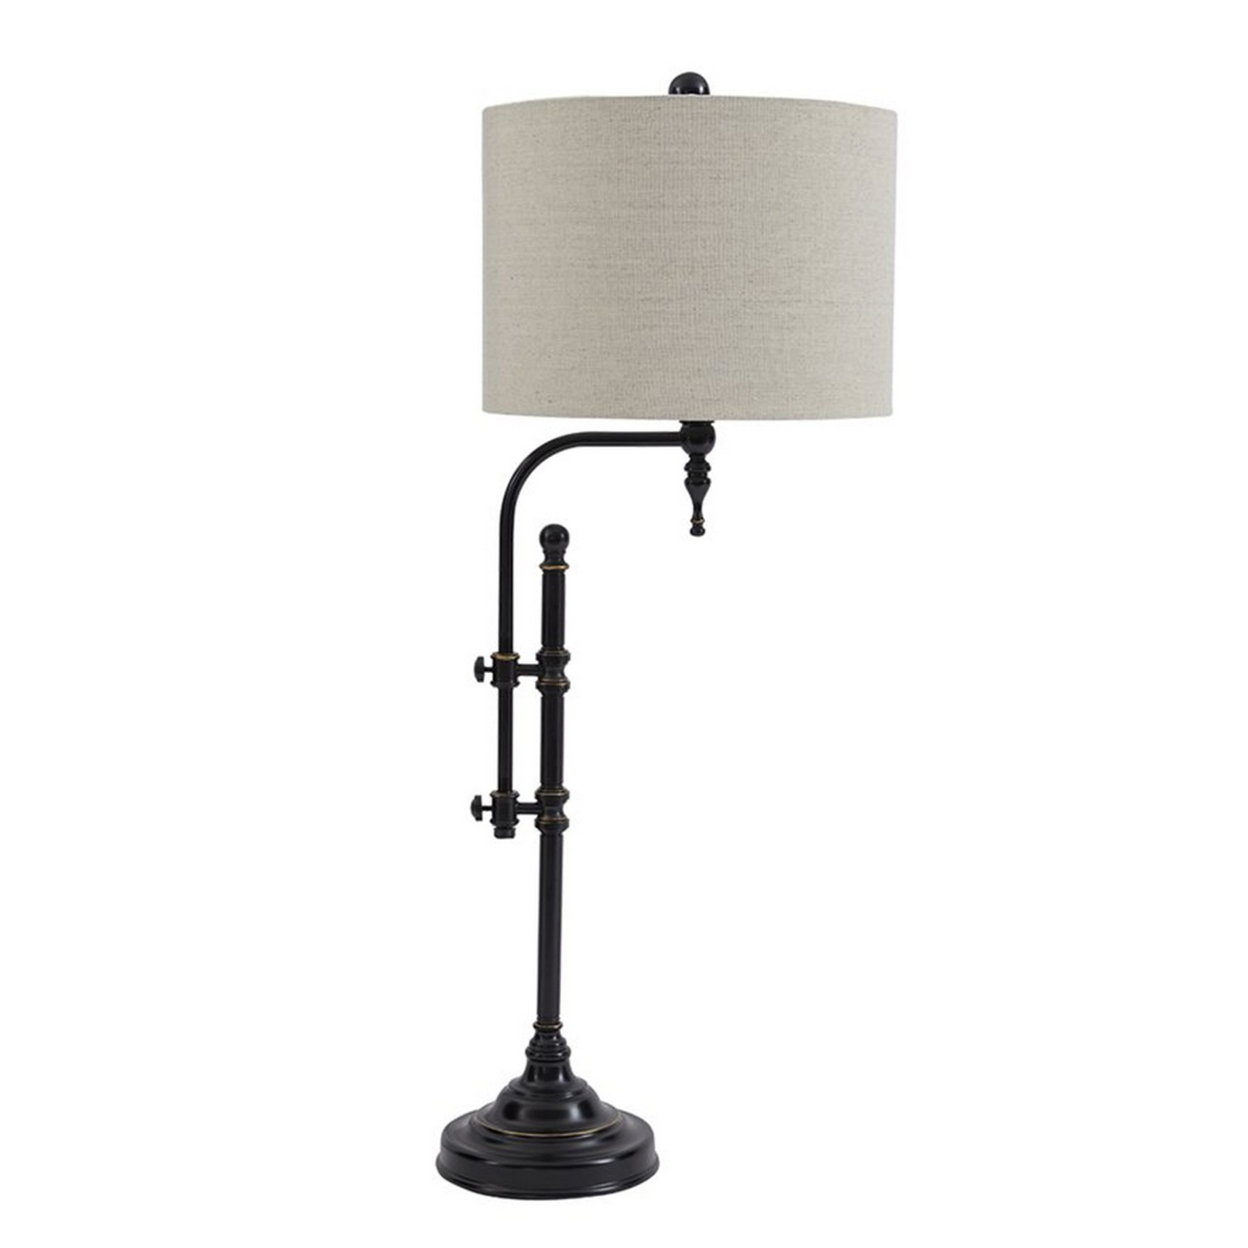 Metal Table Lamp With Drum Shade And Adjustable Arm, Gray And Black- Saltoro Sherpi